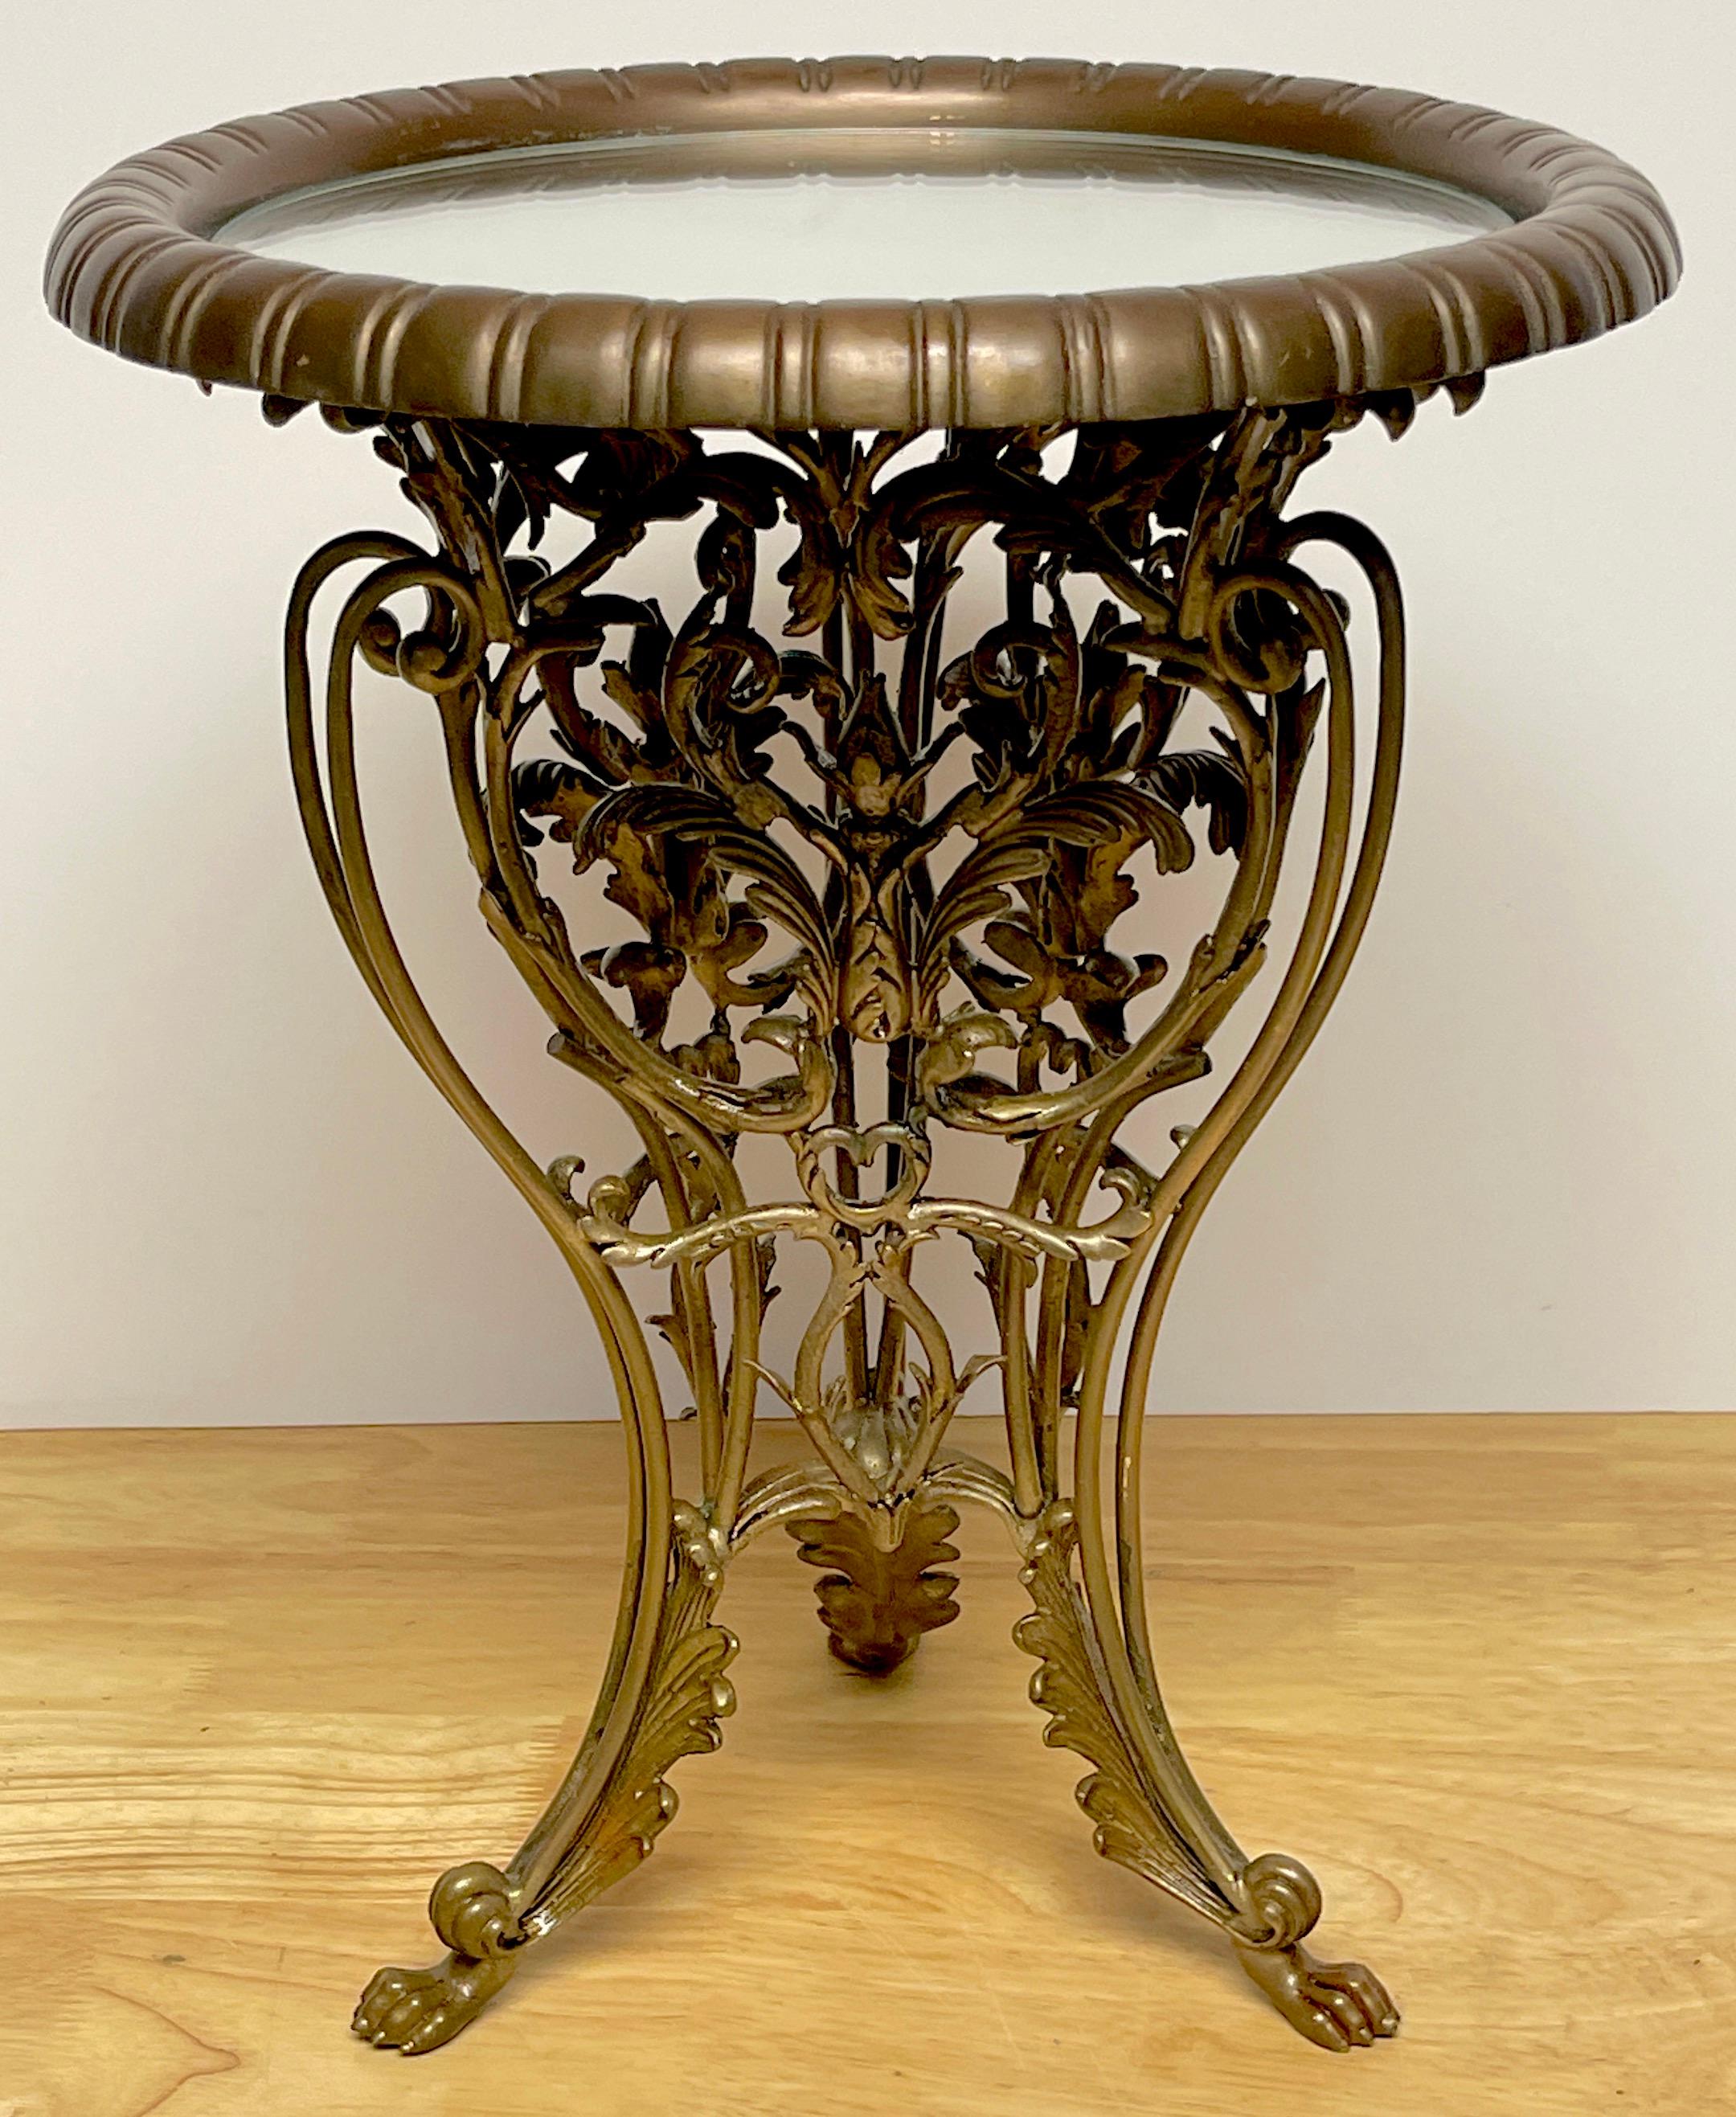 Diminutive Louis XVI style bronze mirror topped gueridon or plateau 

With reeded gallery edge with a 8.5-Inch diameter inset mirror top, resting on a exquisitely cast 8-Inch diameter floral trellis tripartite base raised on paw feet, remnants of